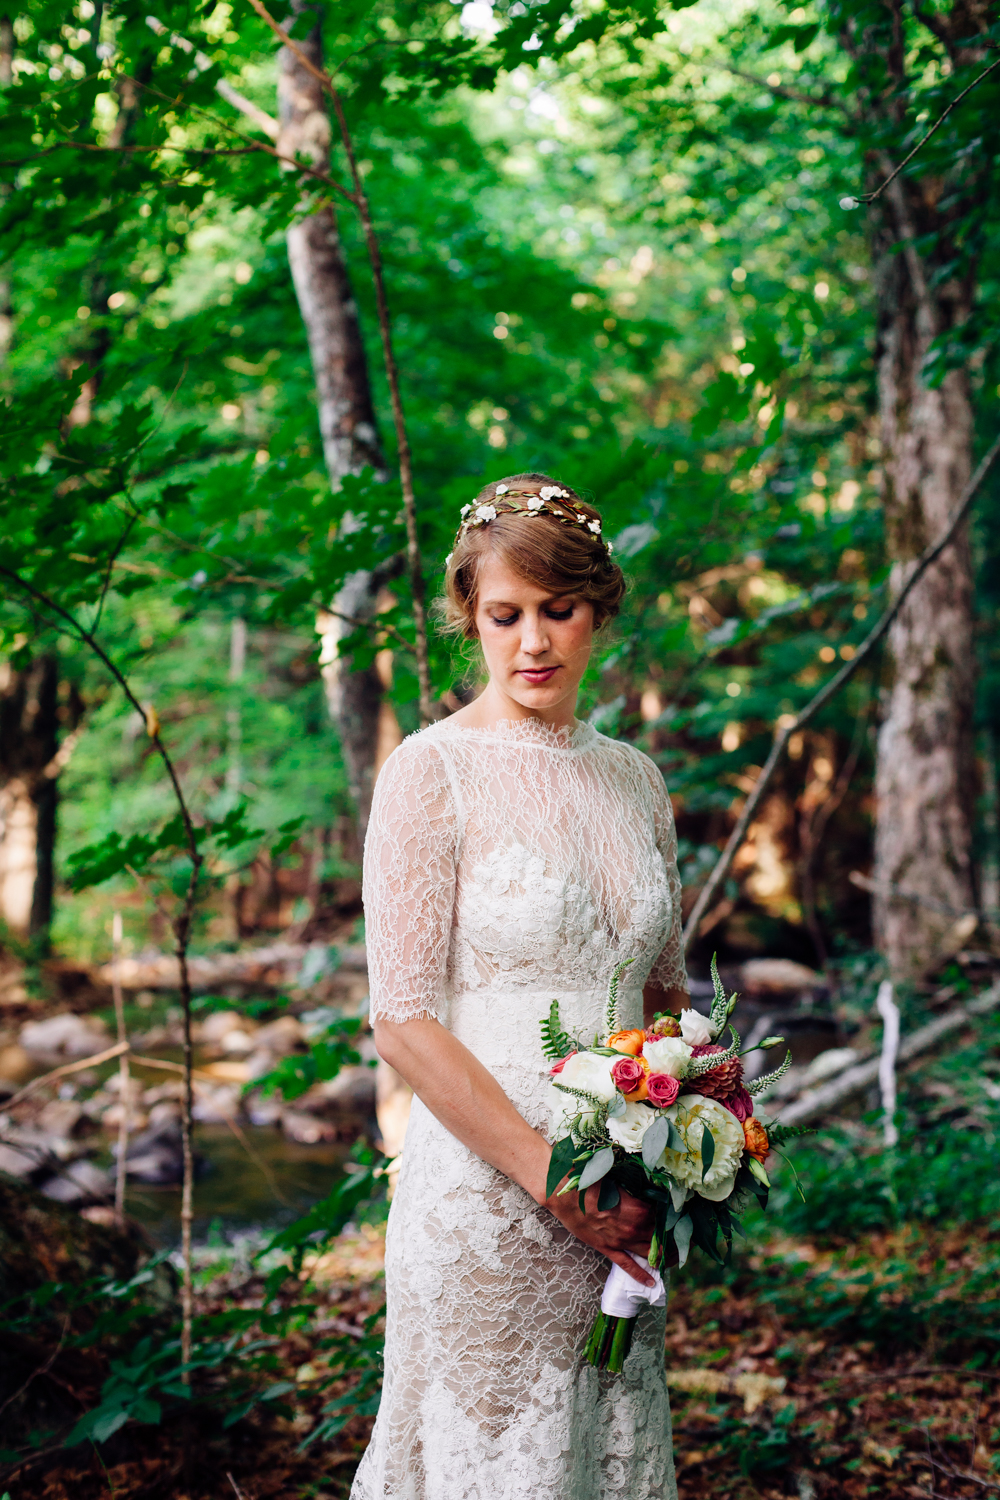  A bride poses with her bouquet in upstate New York 